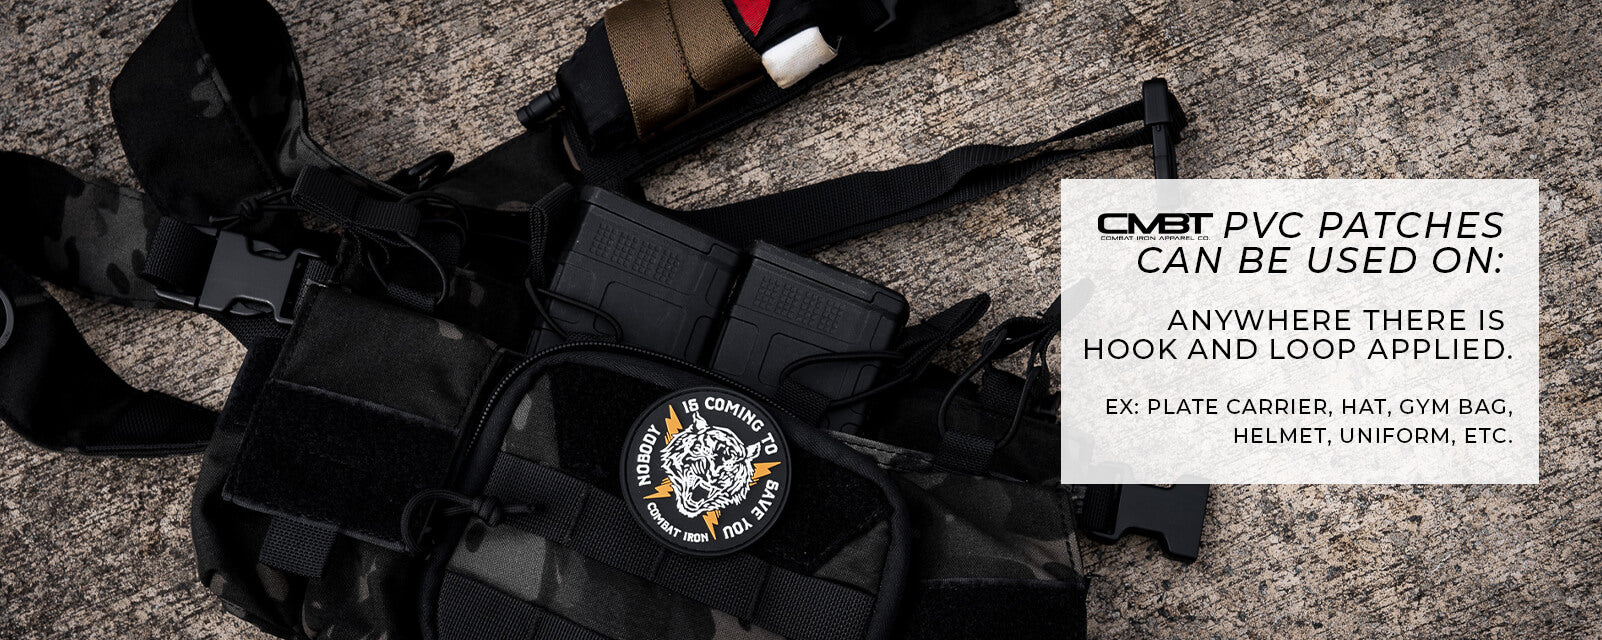 Funny Morale Patch, Army Style Patch, Horror Patch Velcro, Unique Custom  Patch, Tactical Gear, Plate Carrier Patch, Patch Collection. 